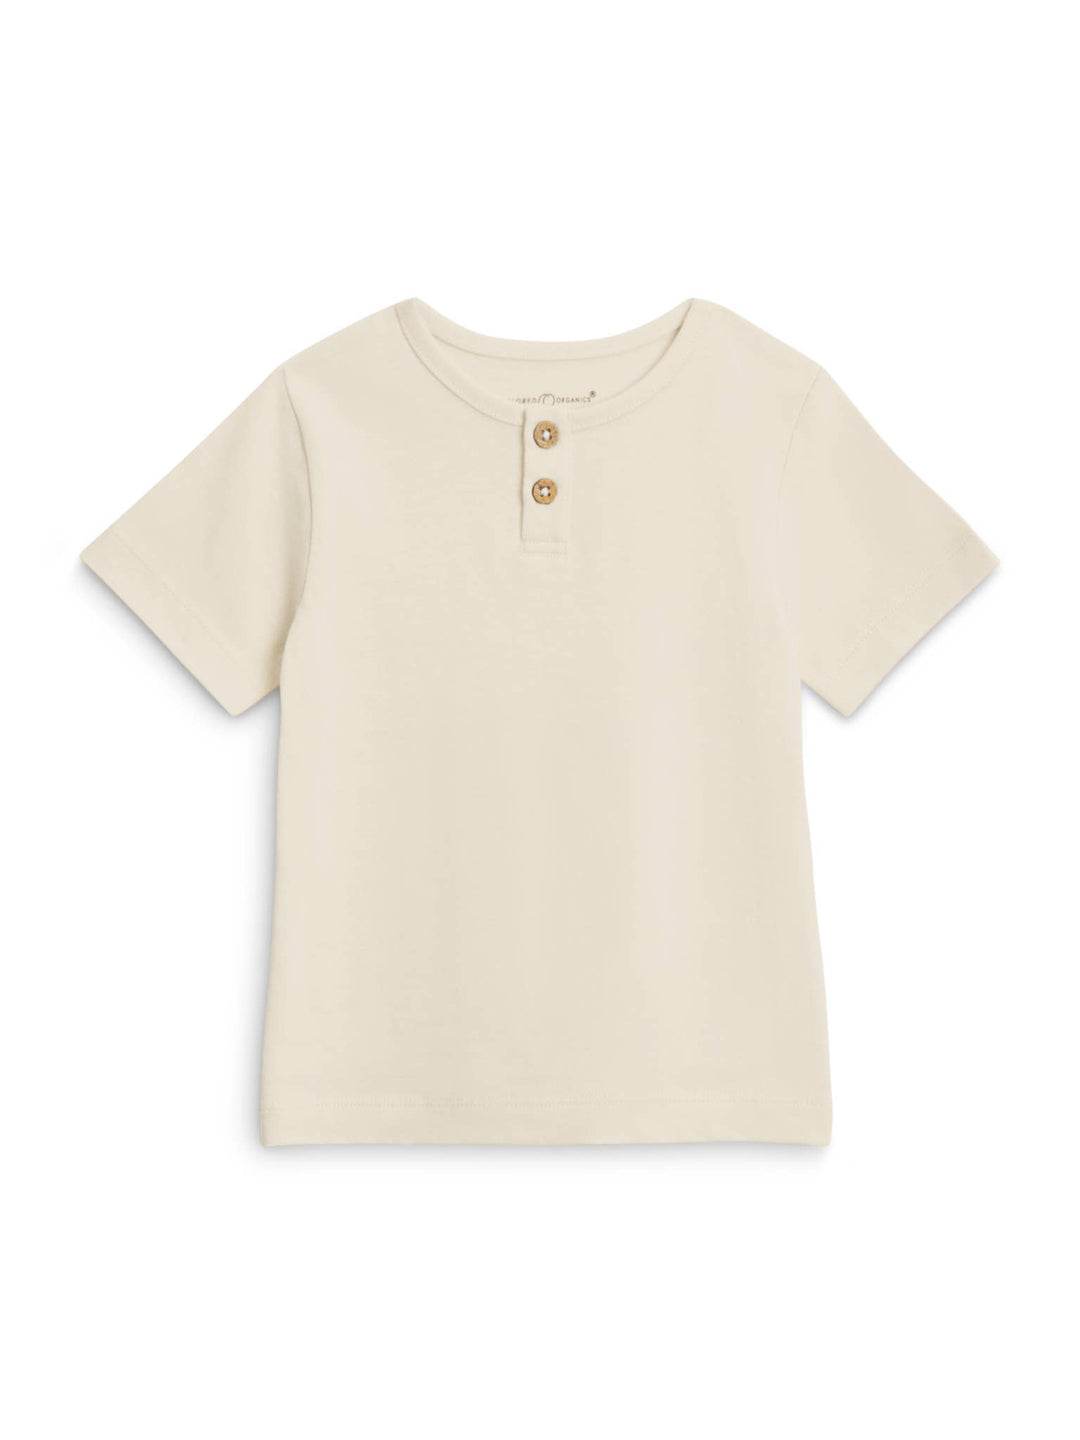 Organic Cotton Reef Henley Crew Neck Tee in Natural, Clay or Harbor Colors